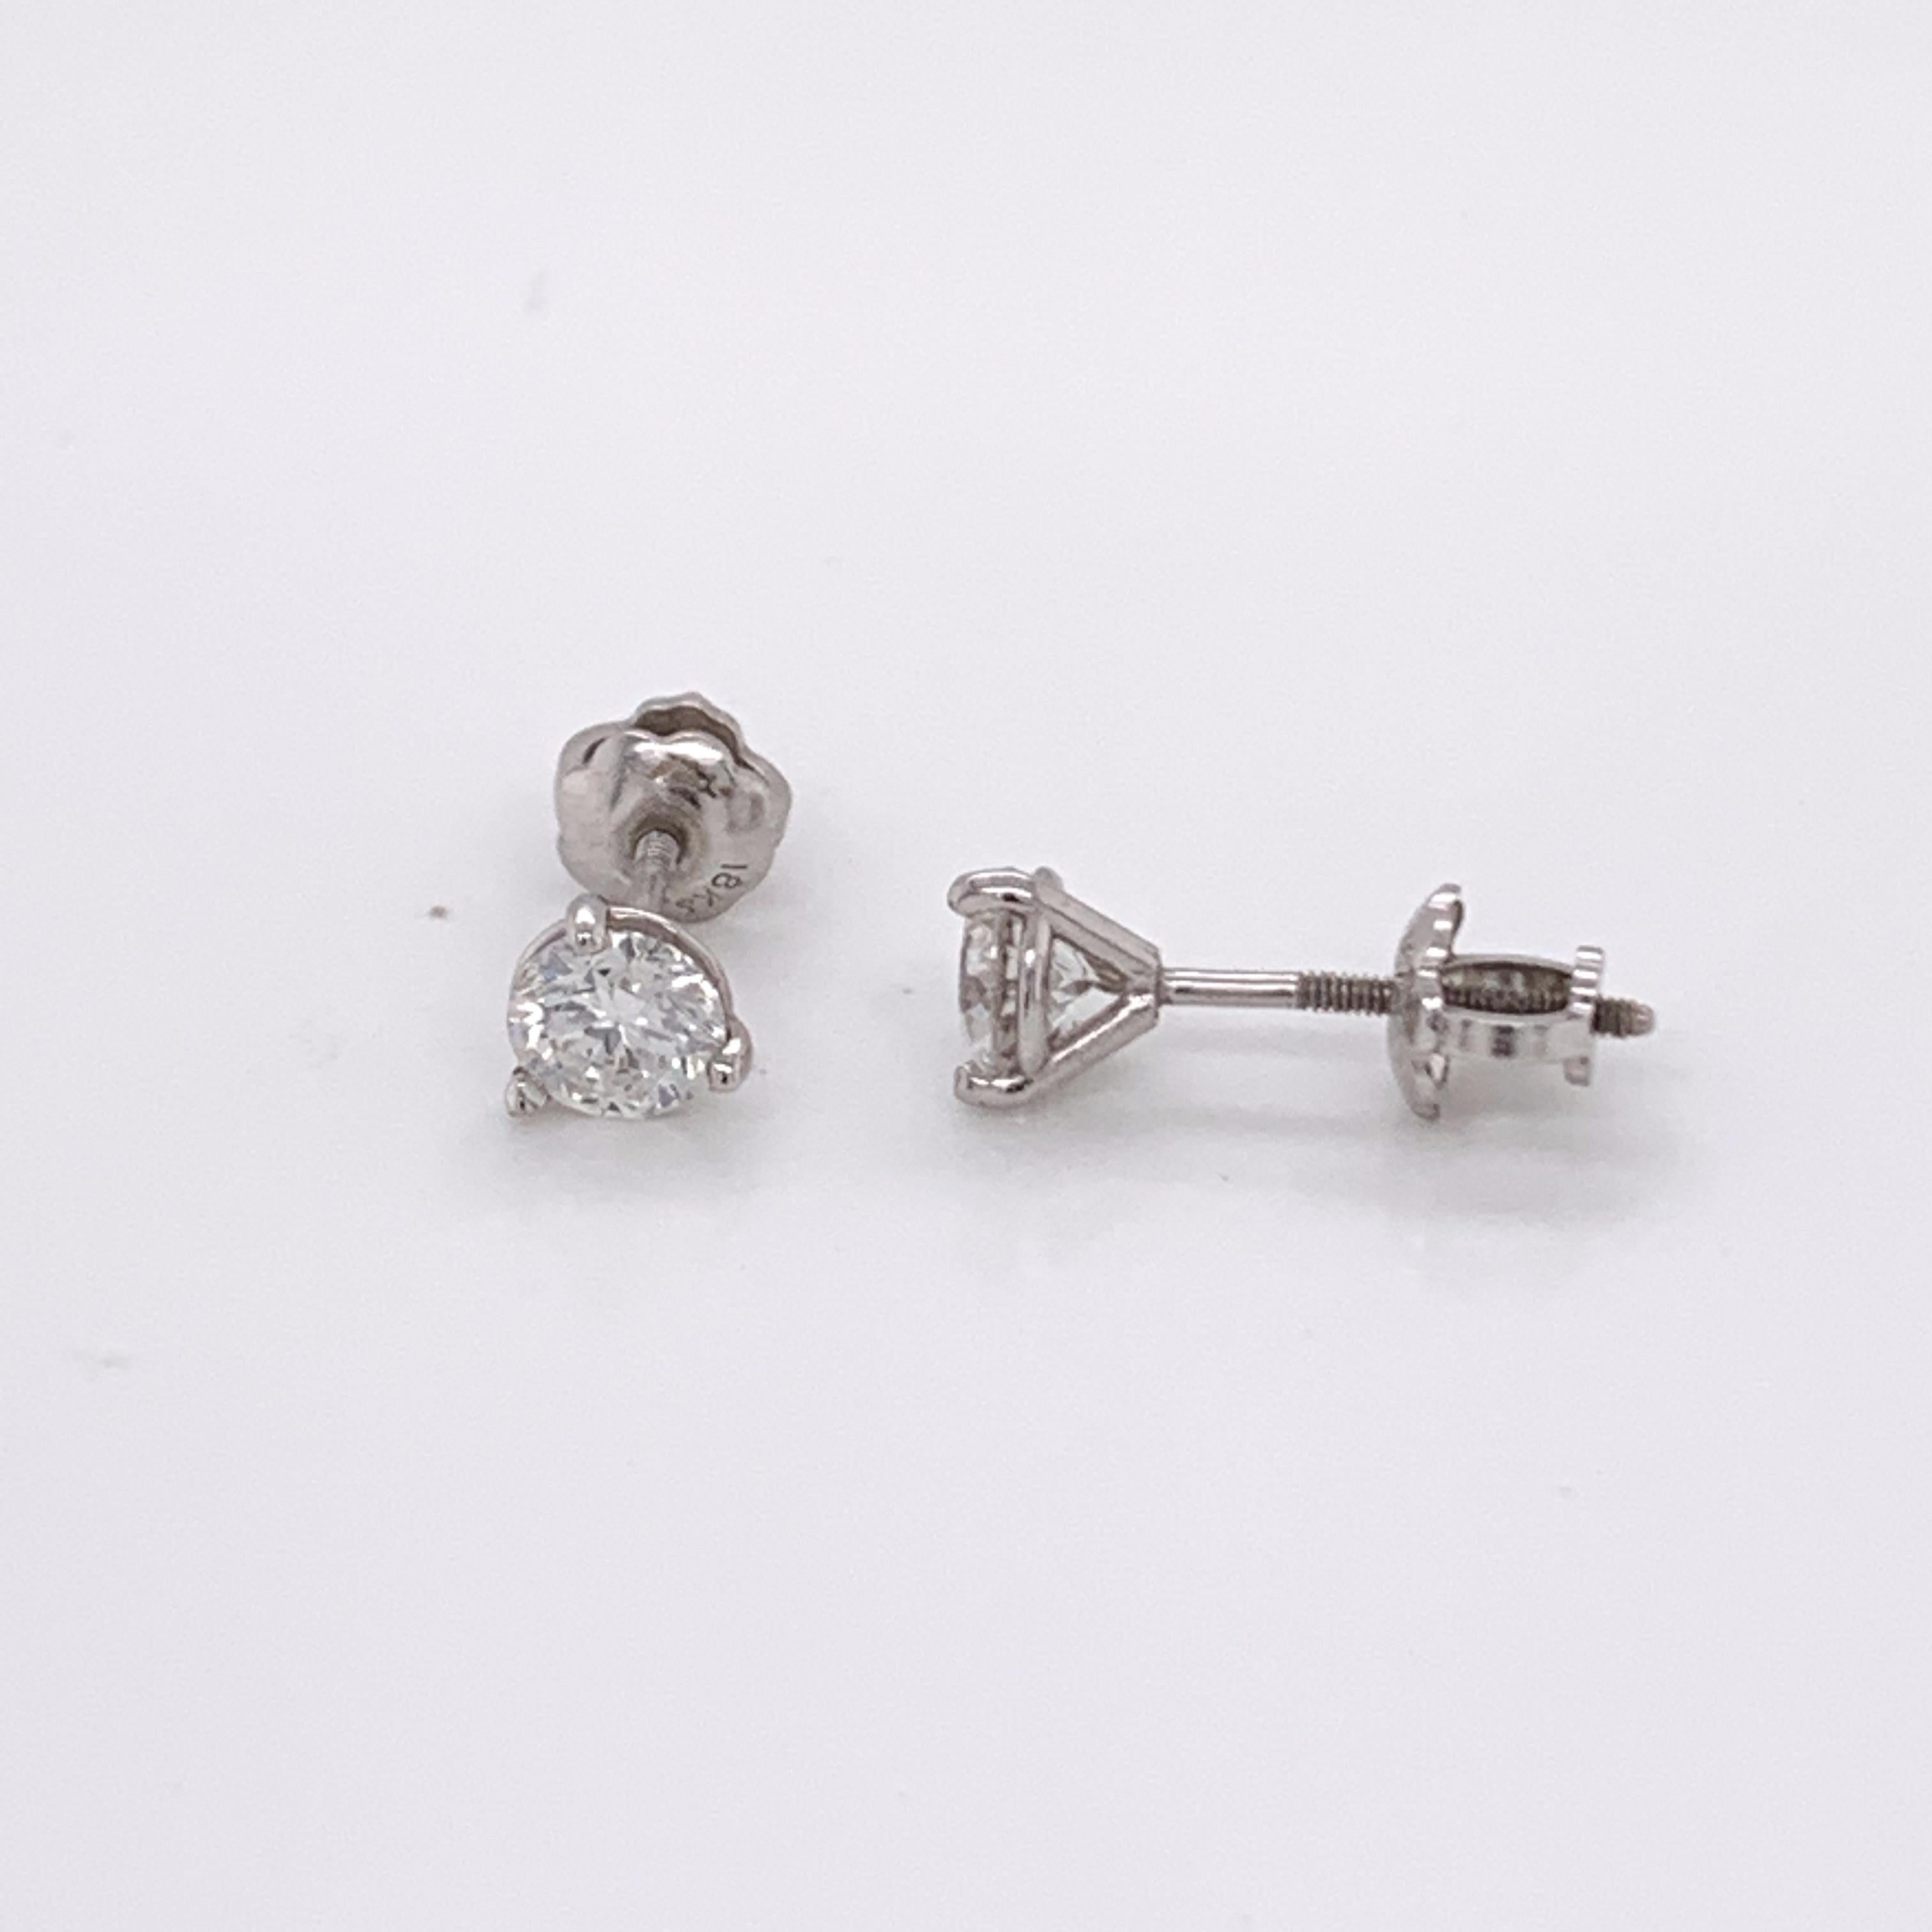 GIA Certified Diamond Stud Earrings made with real/natural brilliant cut diamonds. Total Diamond Weight: 0.80 carats. Diamond Quantity: 2 (round diamonds). Color: H-I. Clarity: SI2. Mounted on 18 karat white gold, screw-back setting.